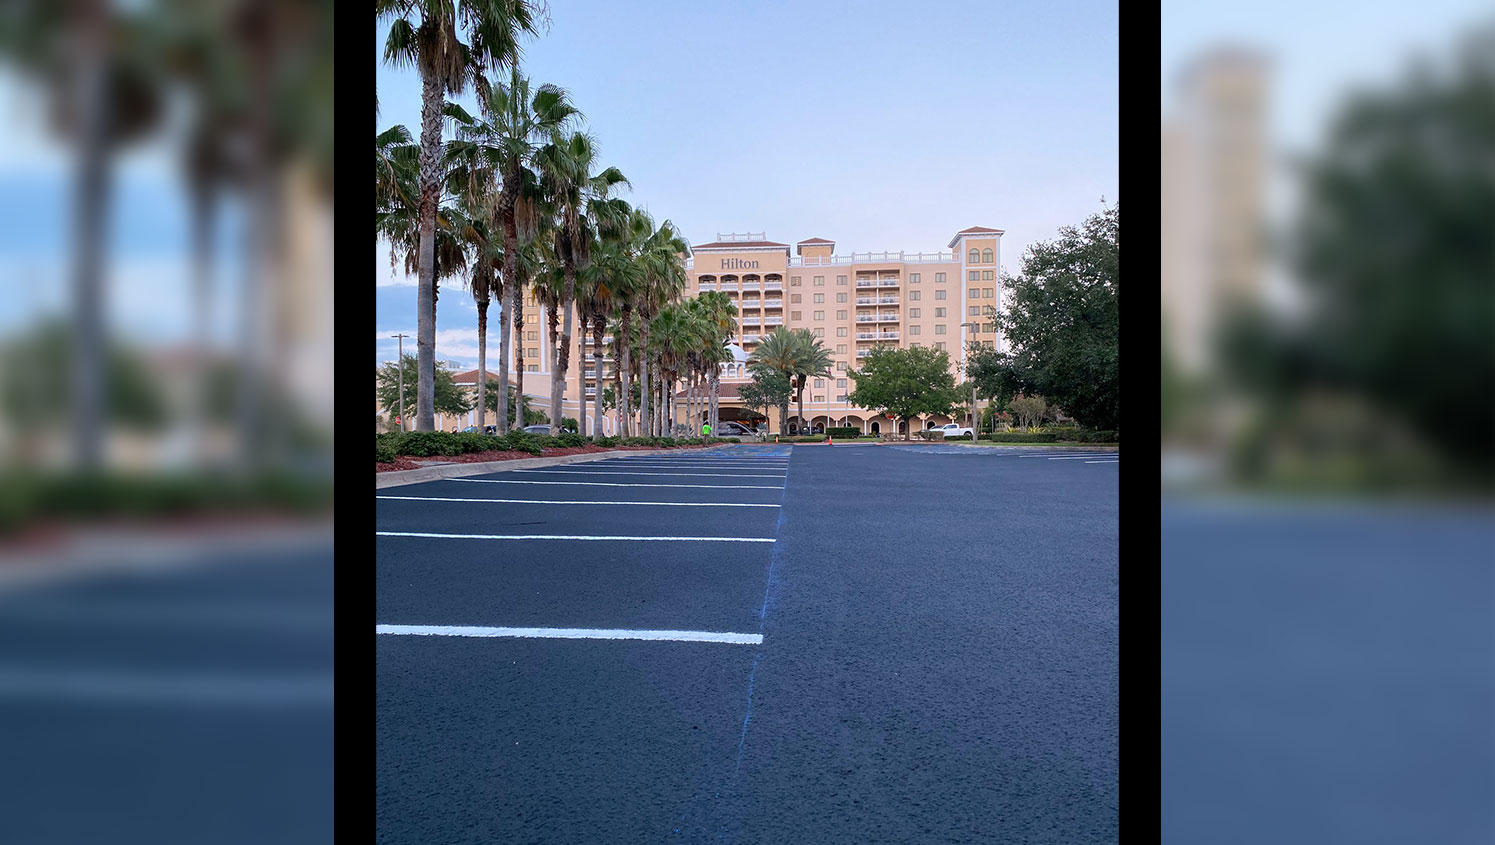 parking lot striping for hilton hotel in st. petersburg, fl